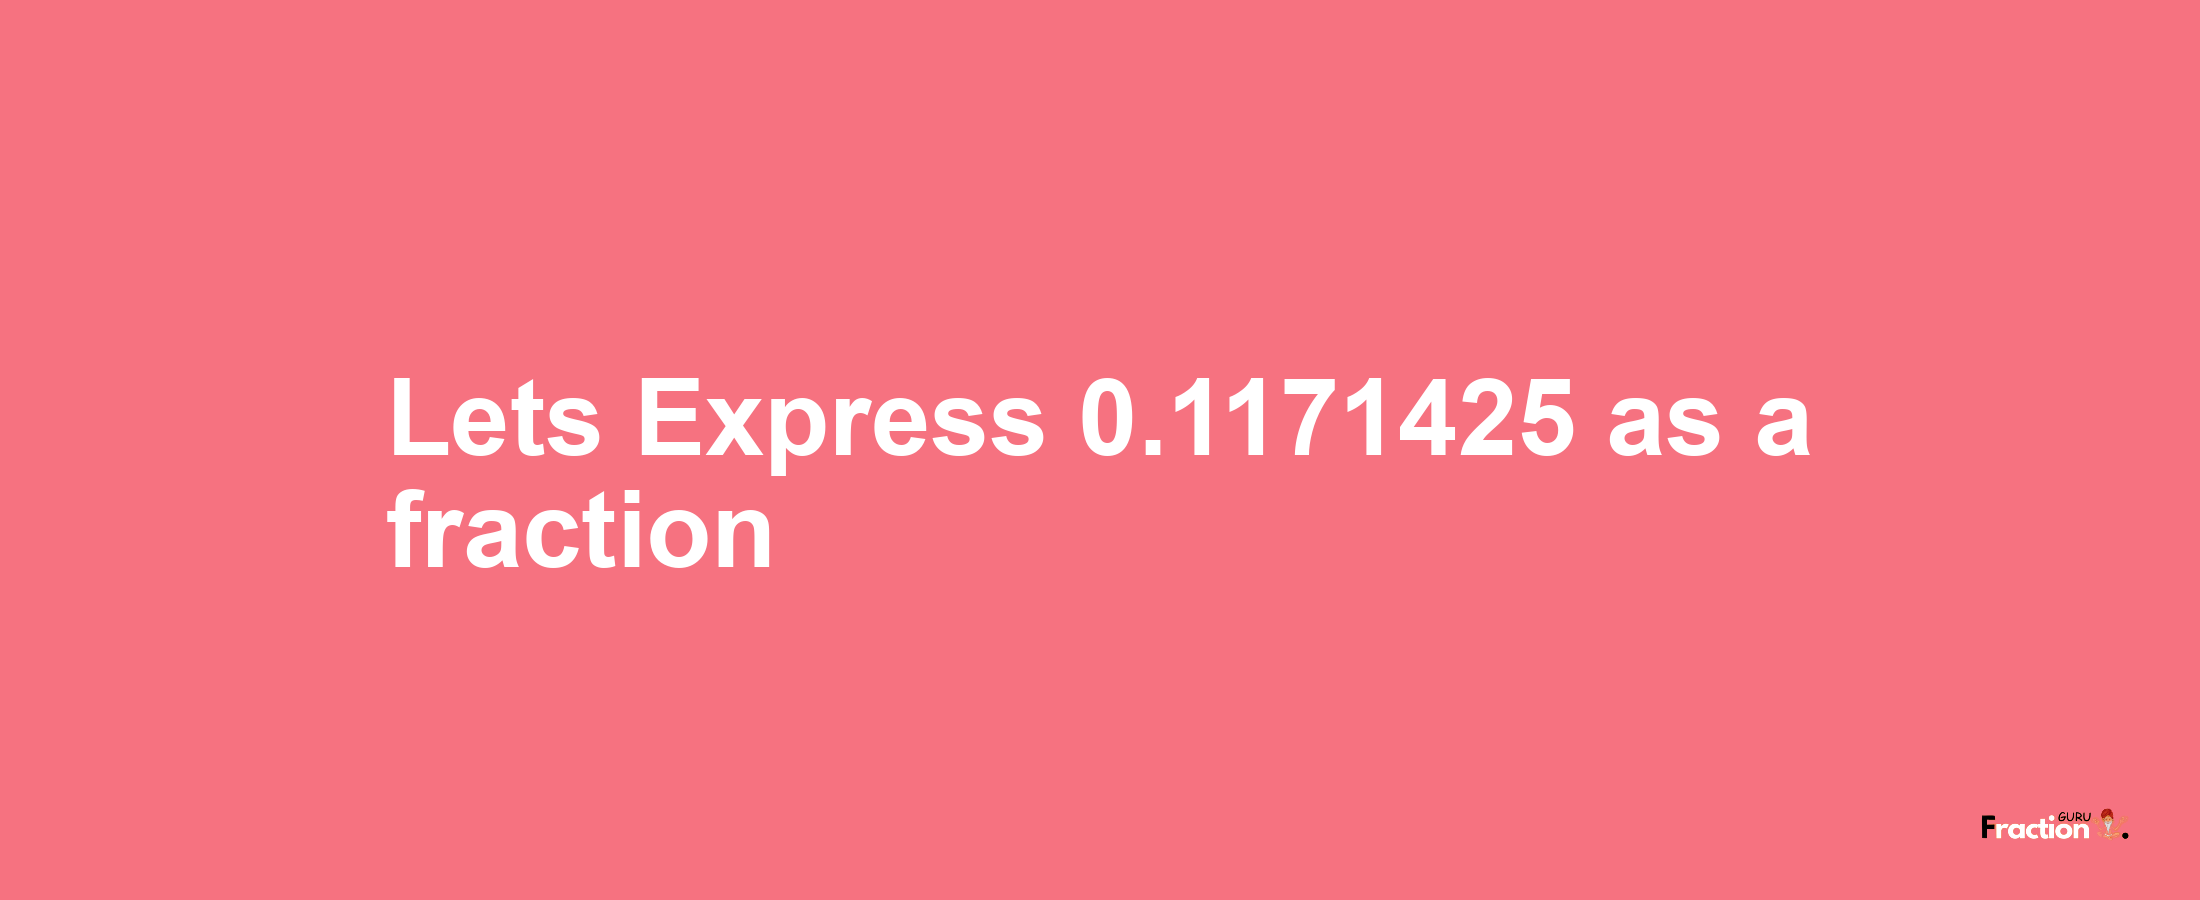 Lets Express 0.1171425 as afraction